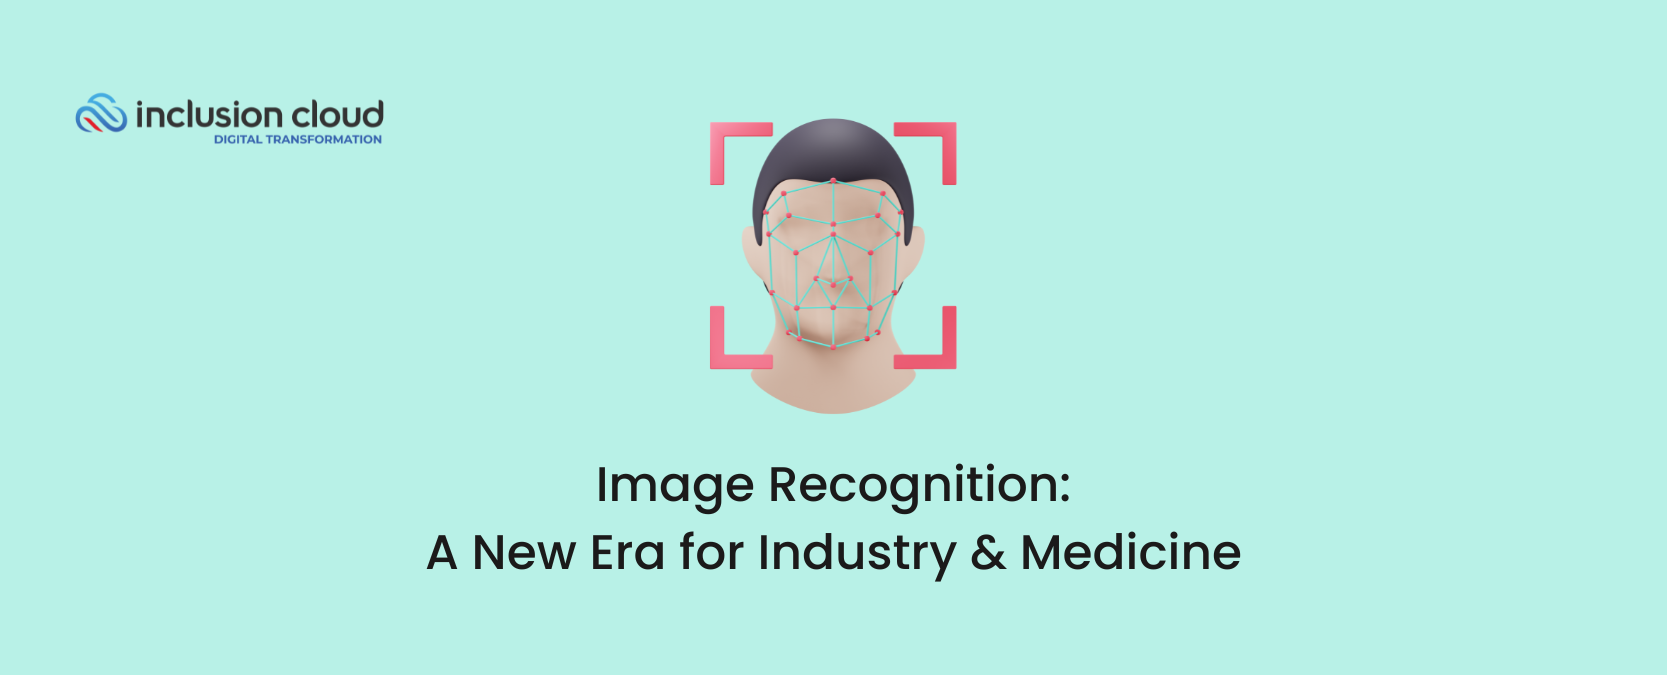 Image Recognition, a New Face in Manufacturing & Medical Diagonsis